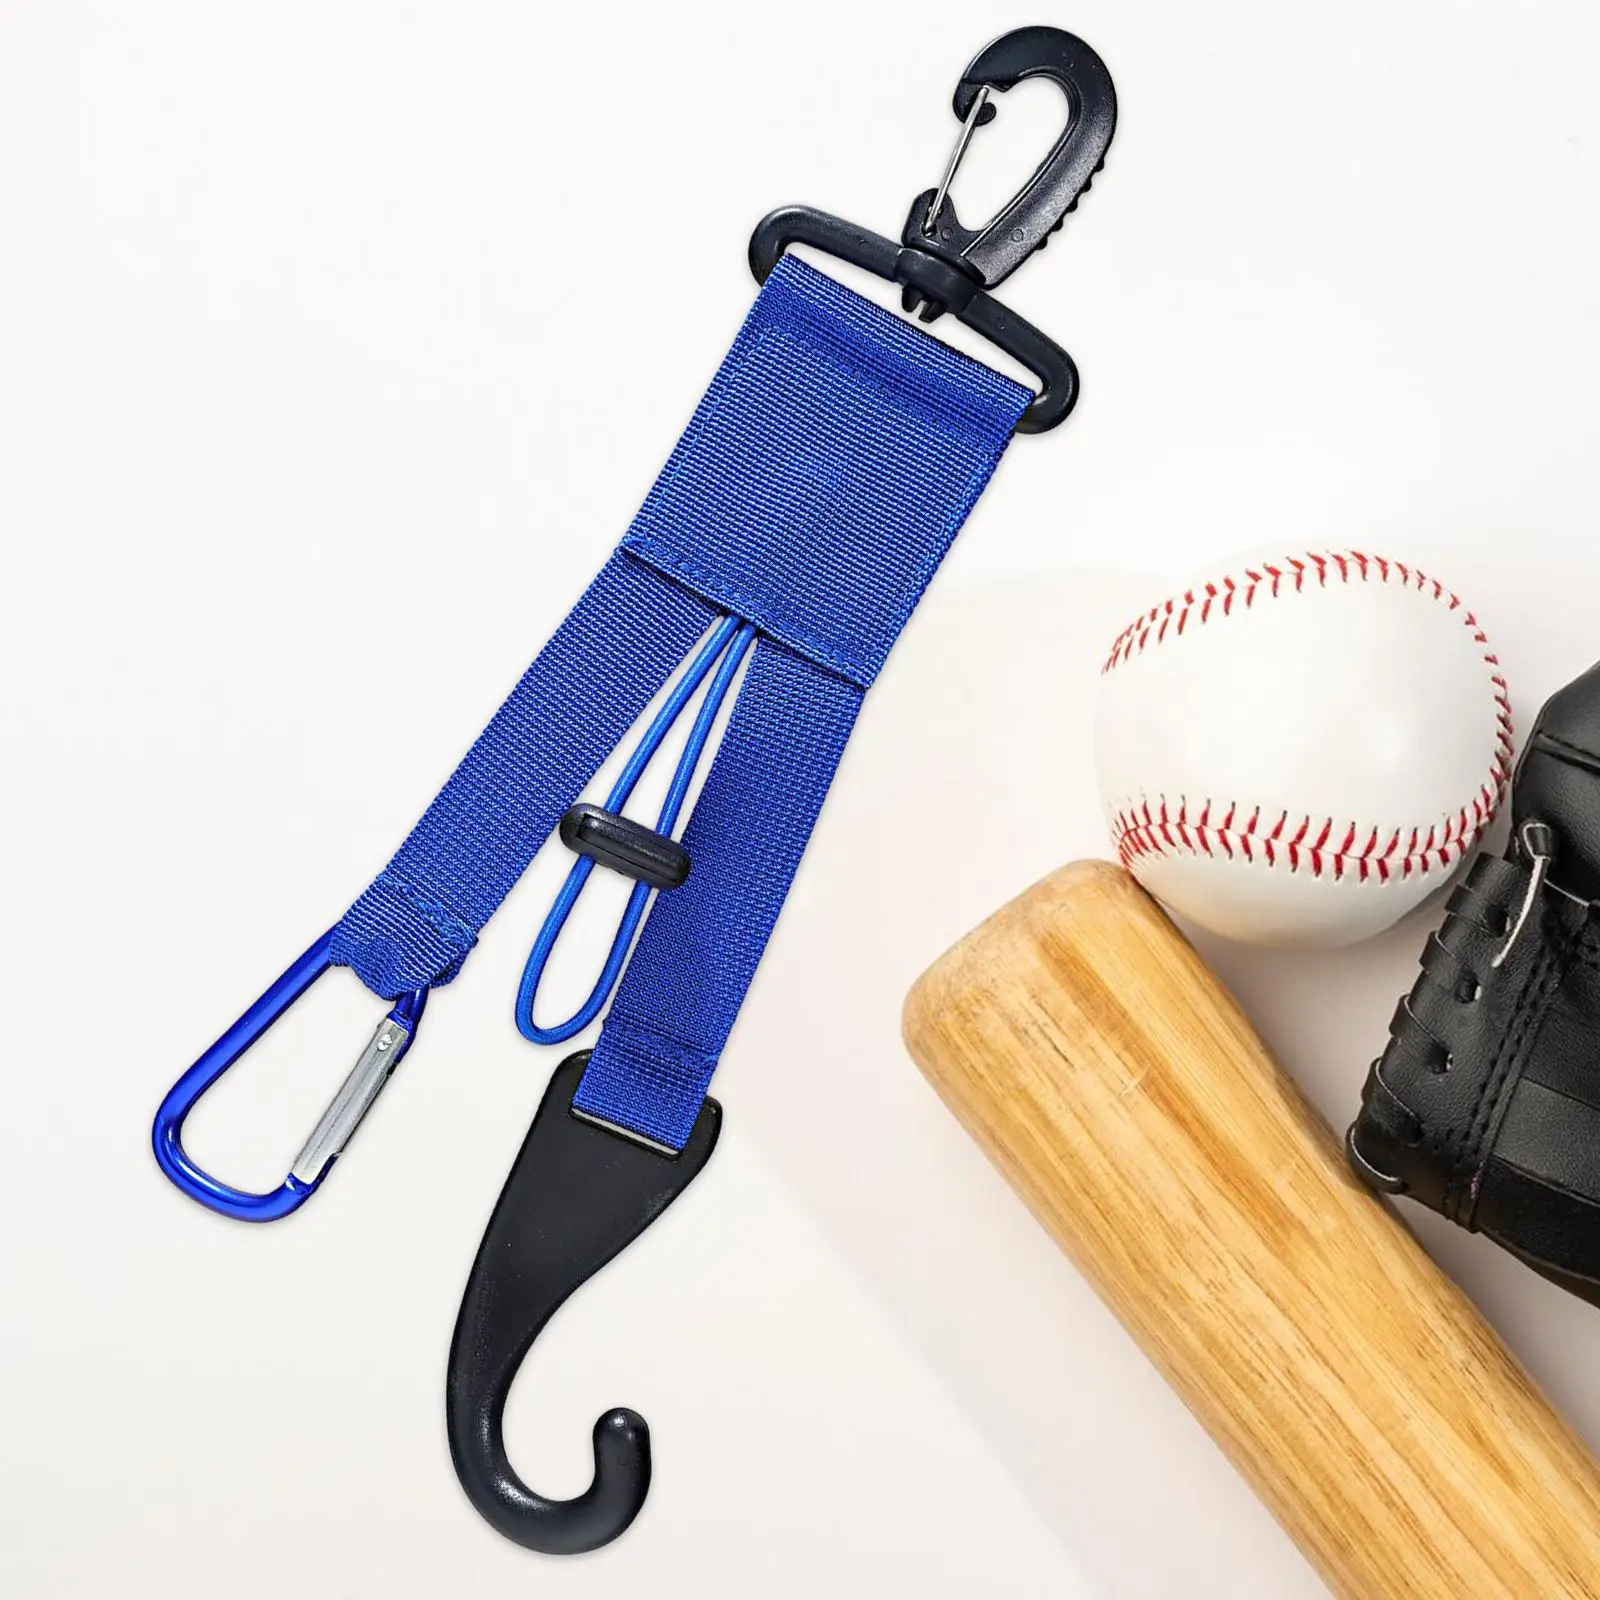 Bats Hanger for Dugout Attaches to Any Fence Multipurpose Dugout Gear Hanger